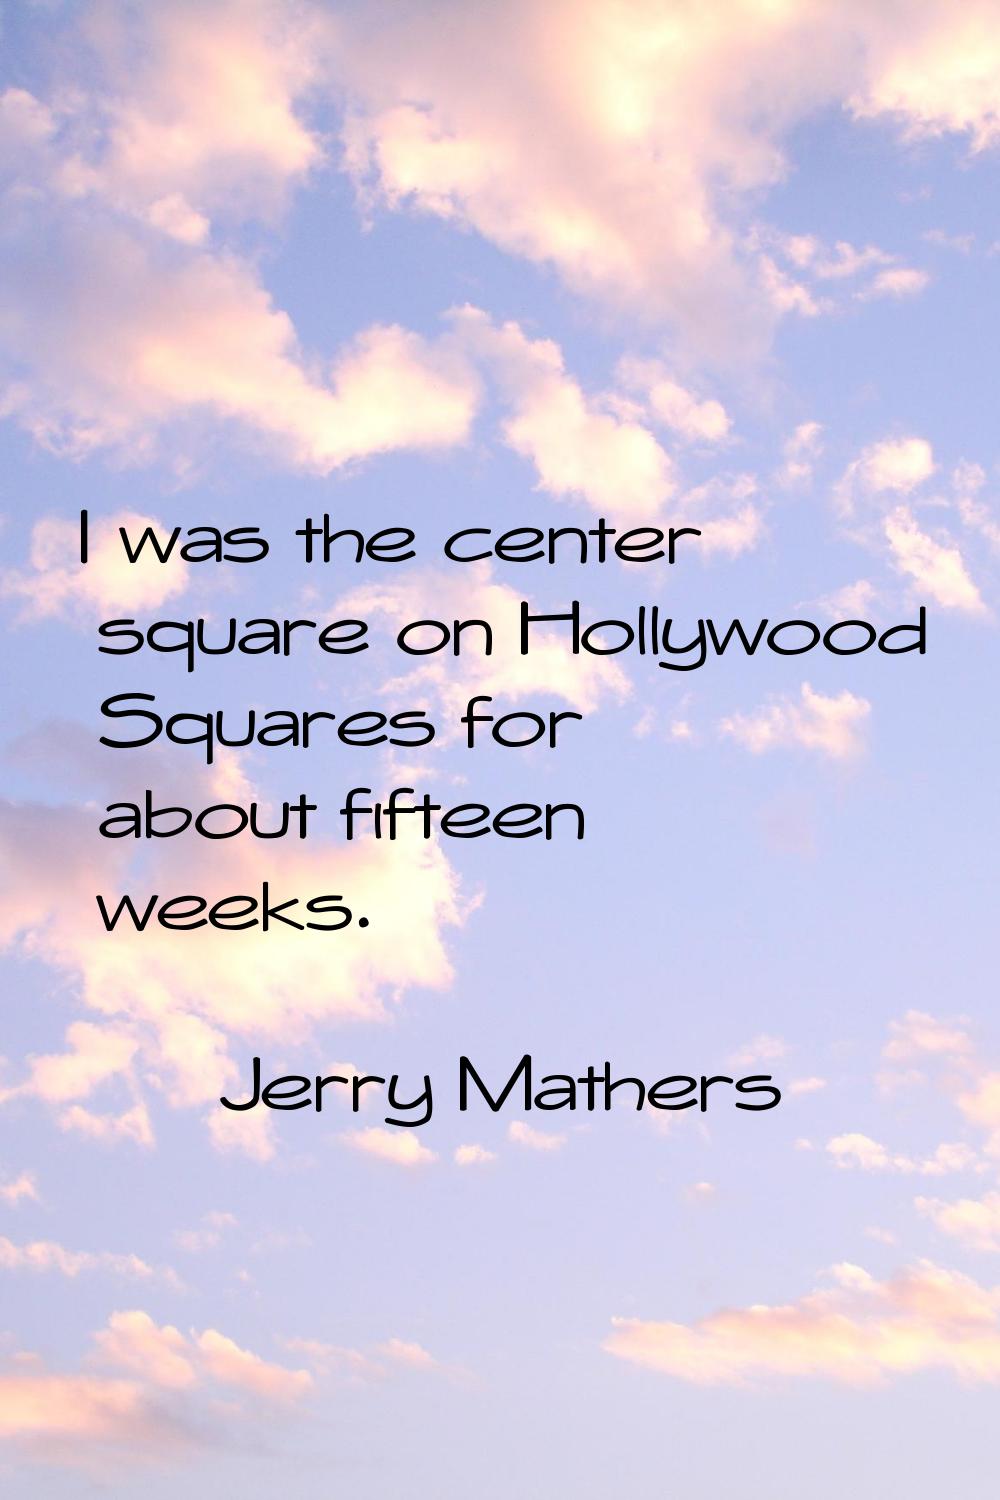 I was the center square on Hollywood Squares for about fifteen weeks.